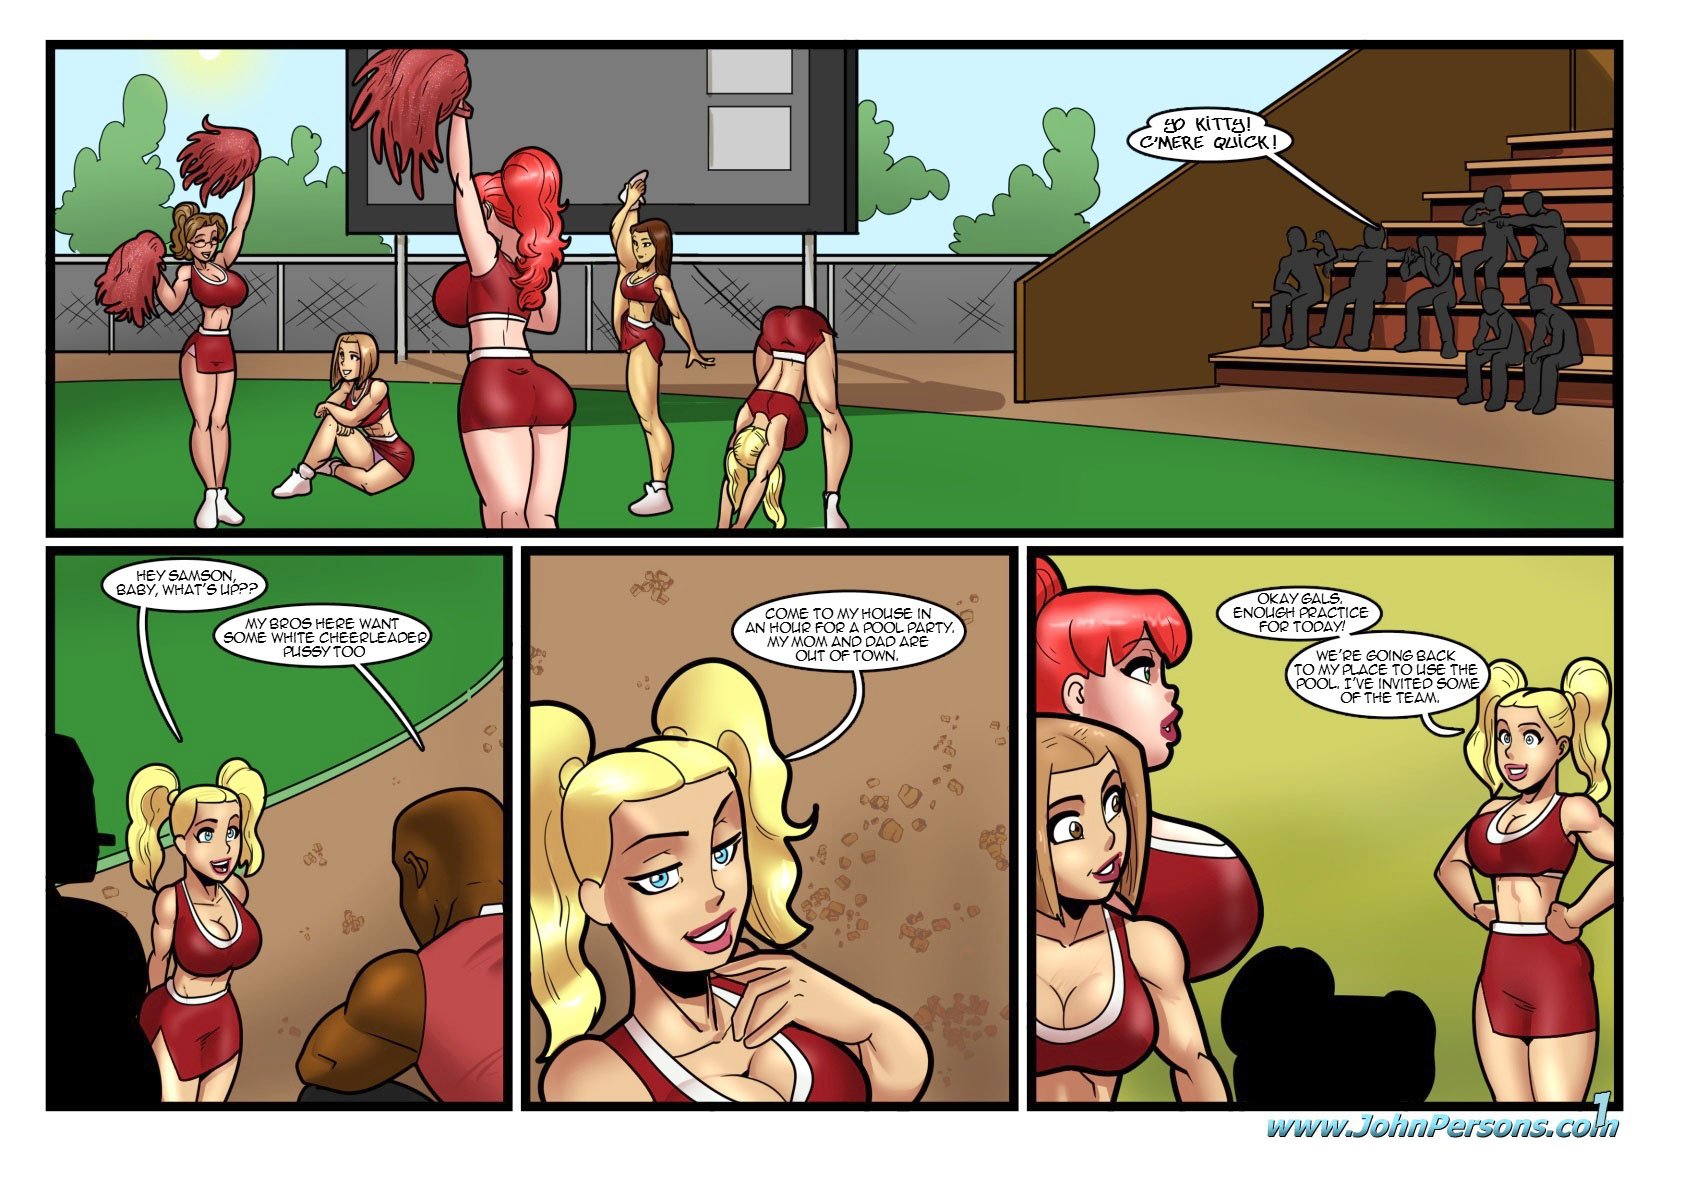 Toon Pool Porn - Pool Party [JohnPersons.com] - 1 . Pool Party - Chapter 1 [JohnPersons.com]  - AllPornComic